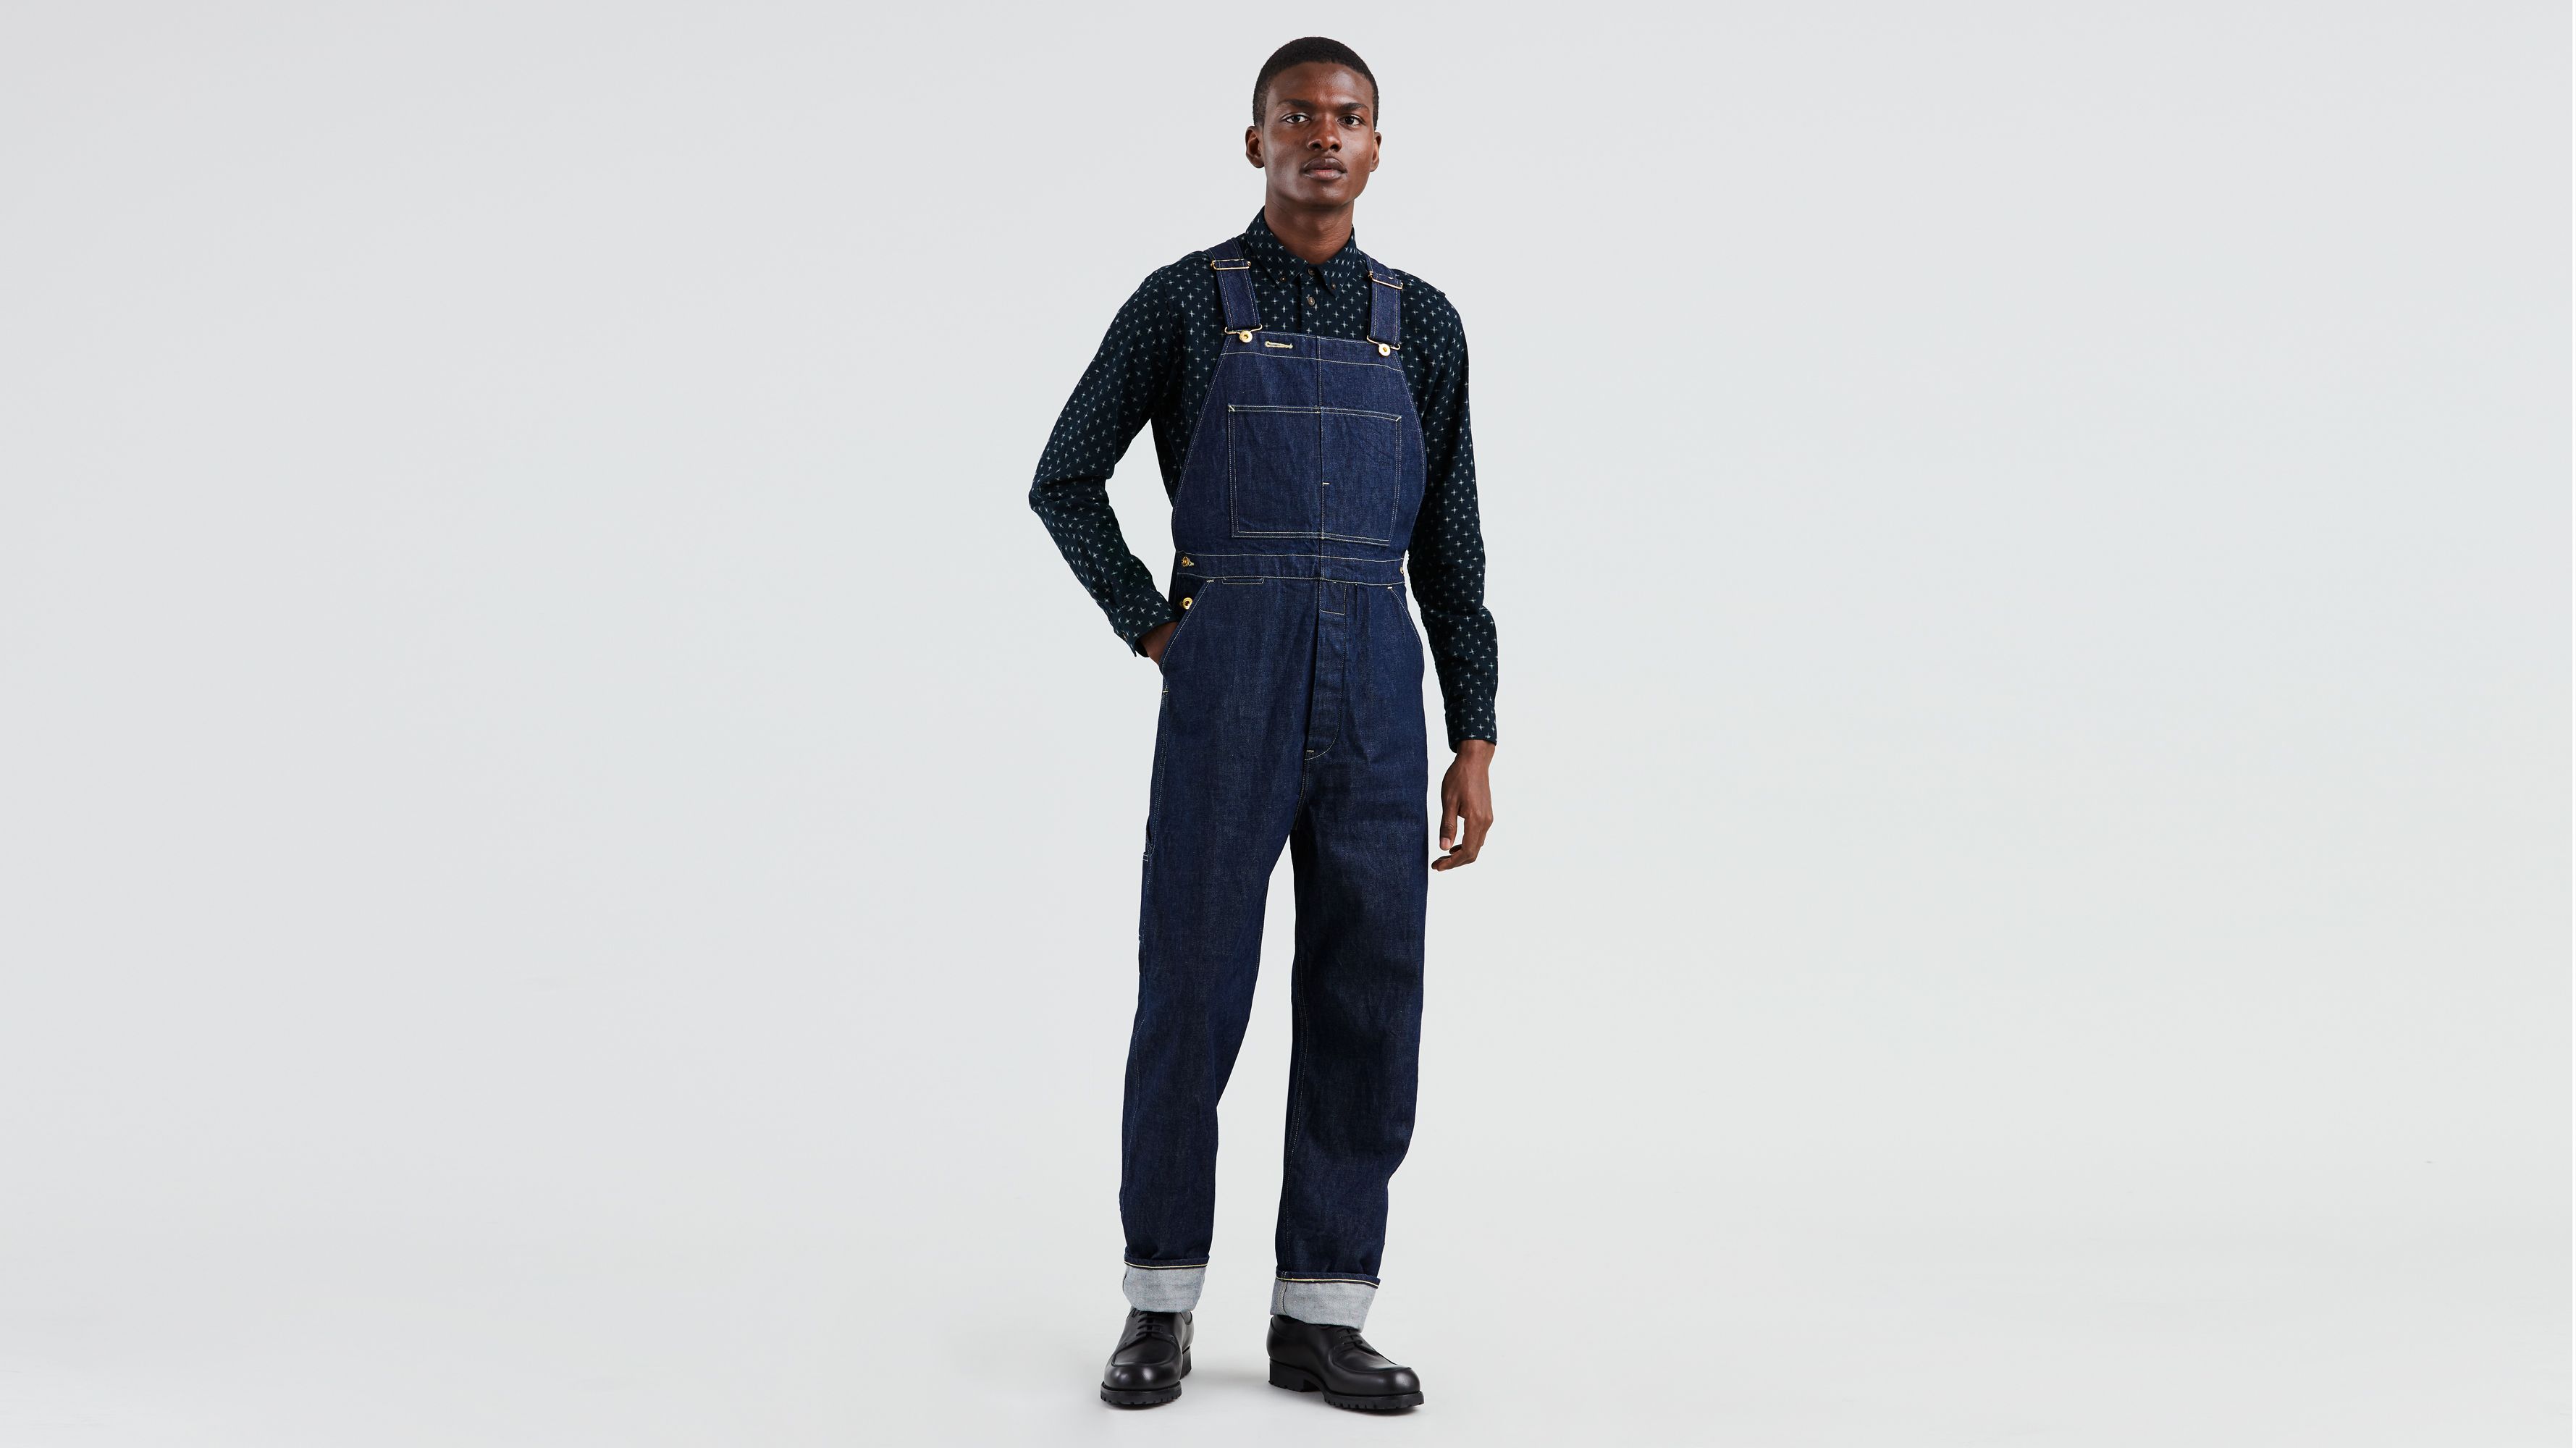 levis made and crafted overalls